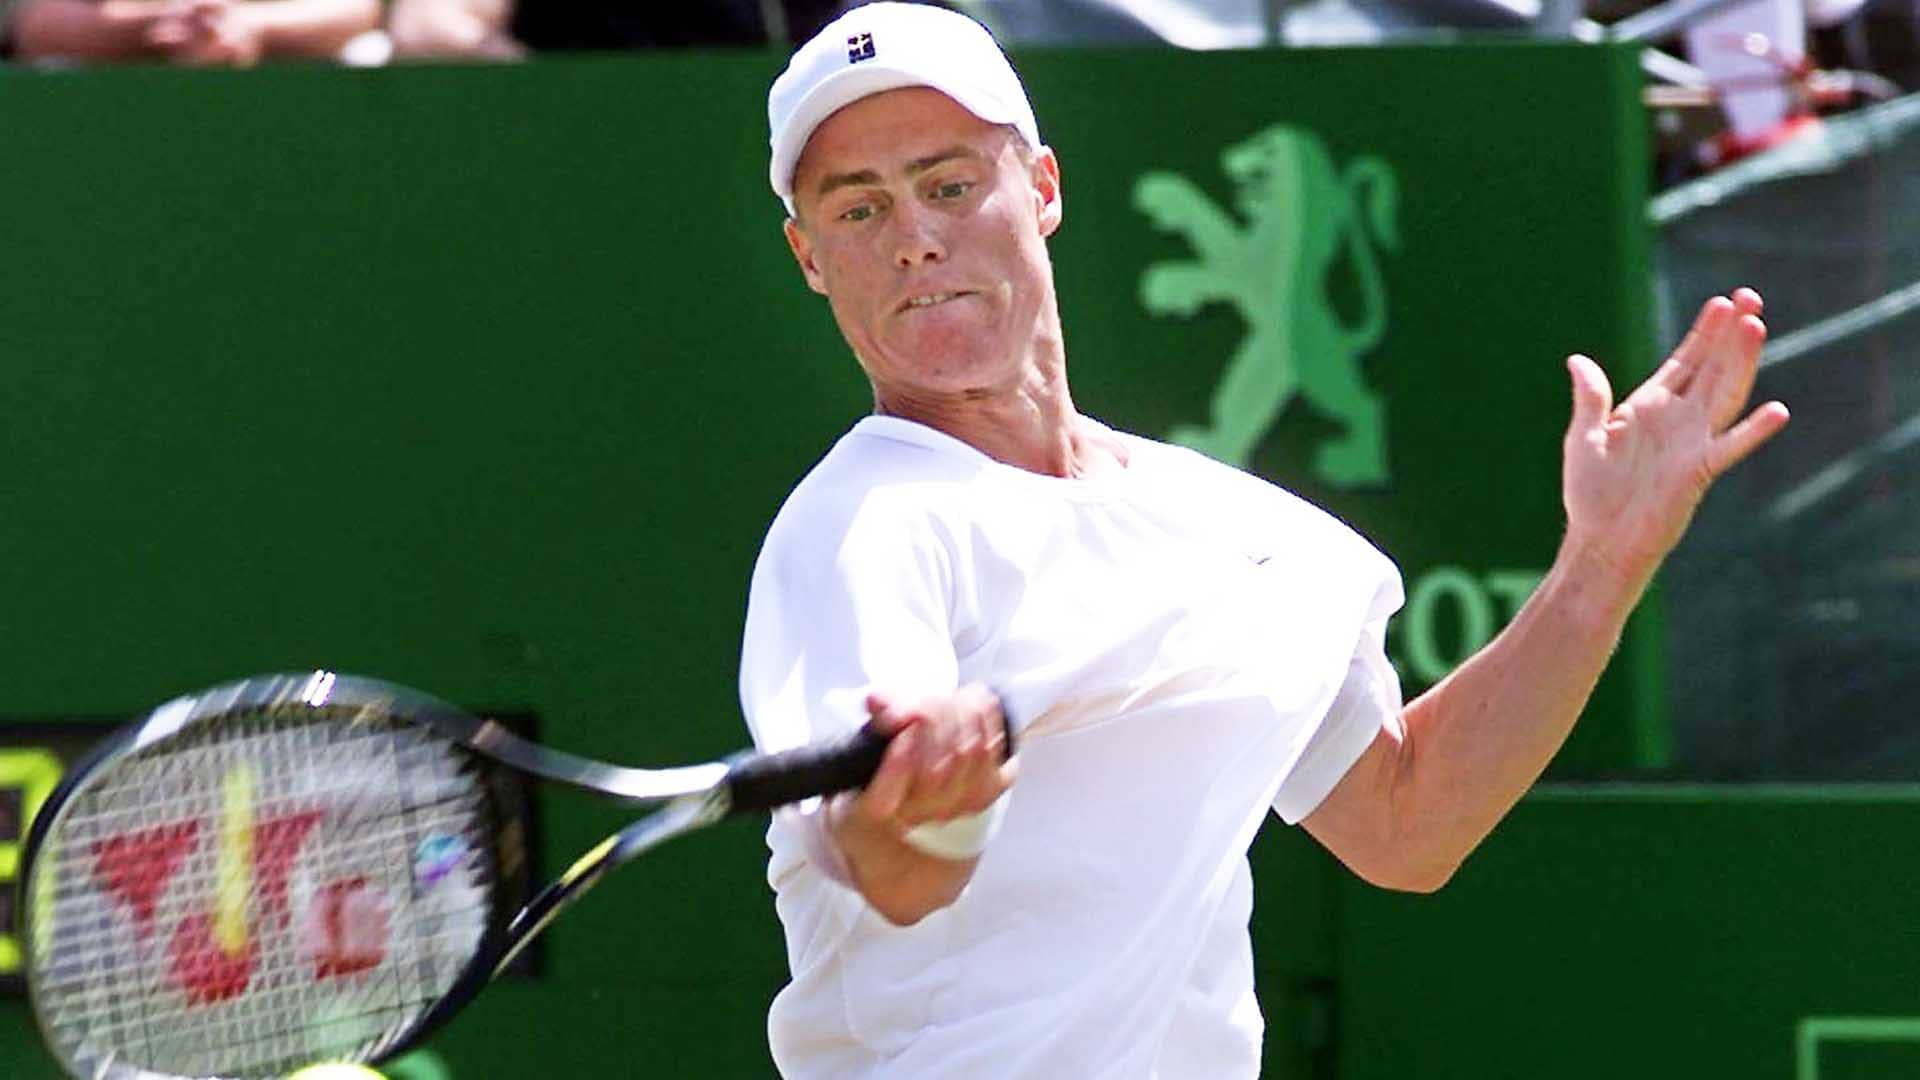 Lleyton Hewitt did not drop a set en route to the Libema Open title on his tournament debut in 2001.